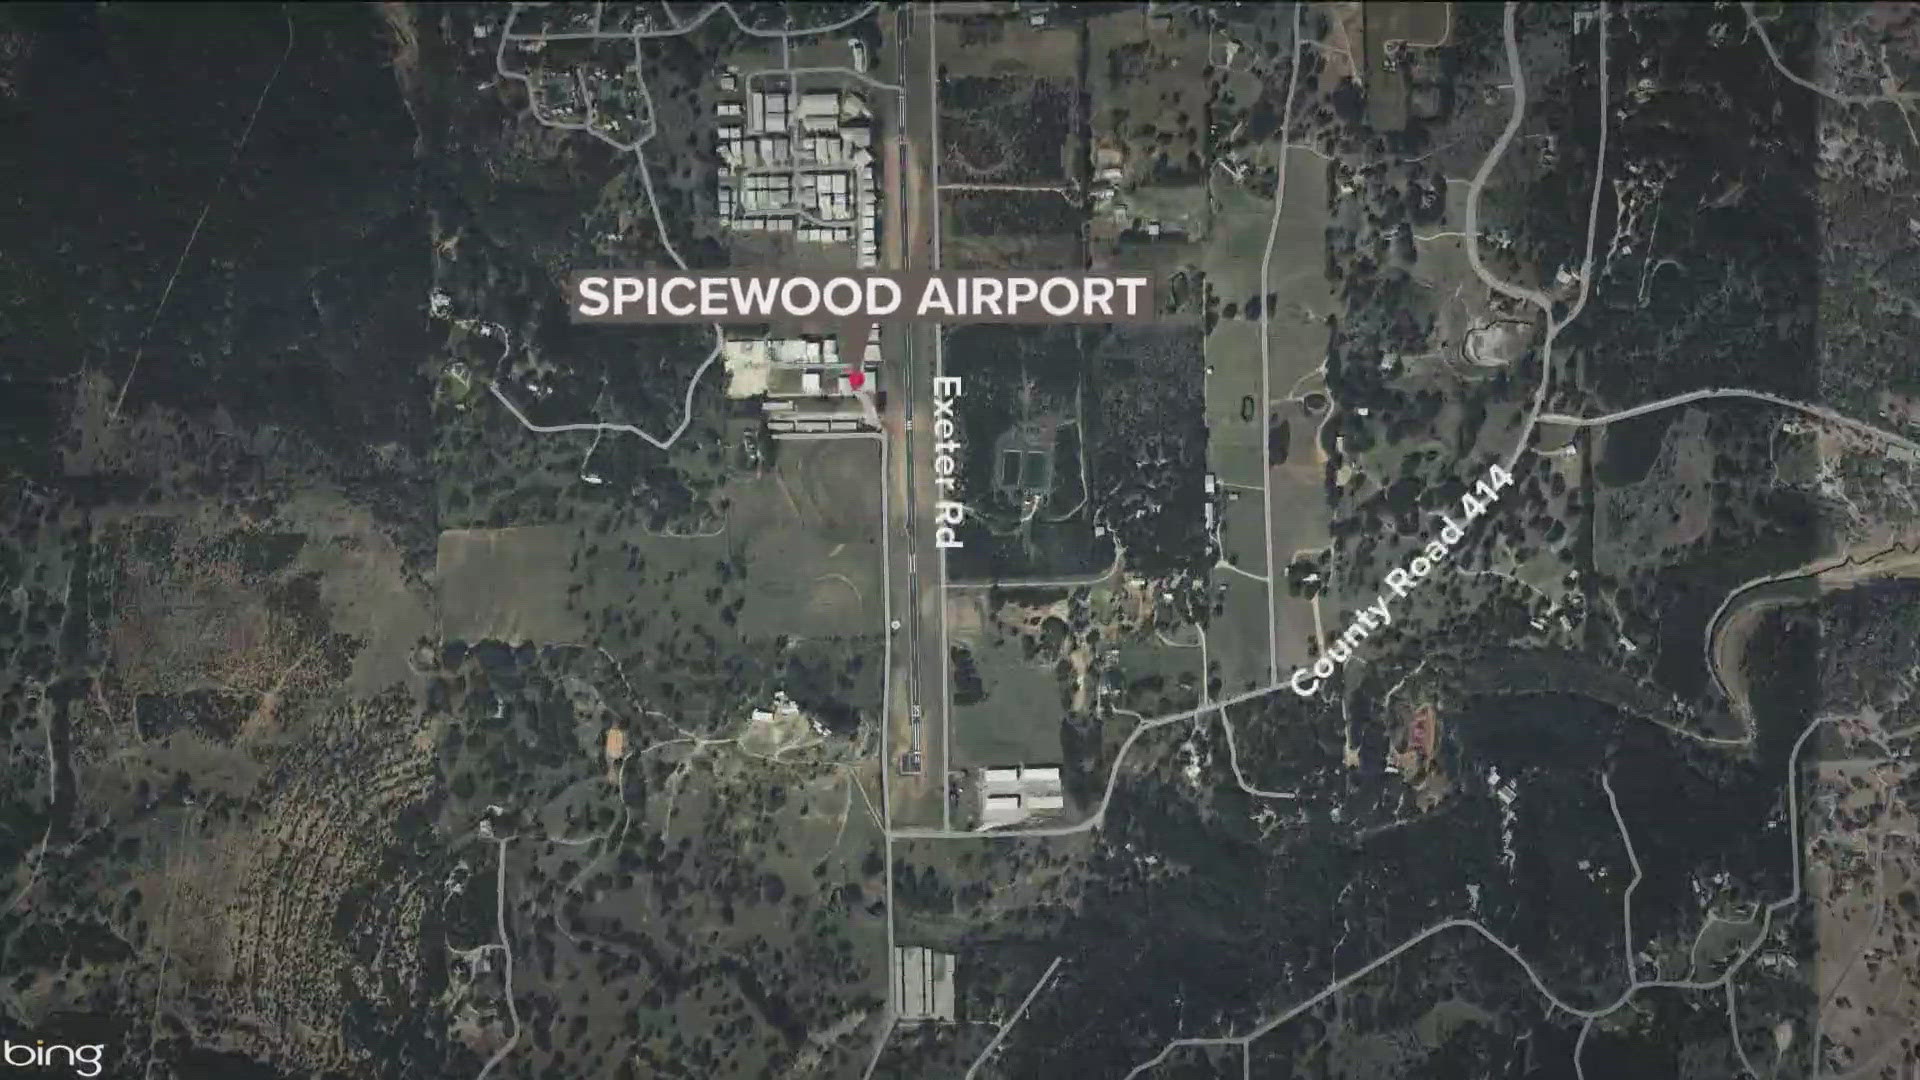 Authorities have identified a 74-year-old man who died in small plane crash Monday night.